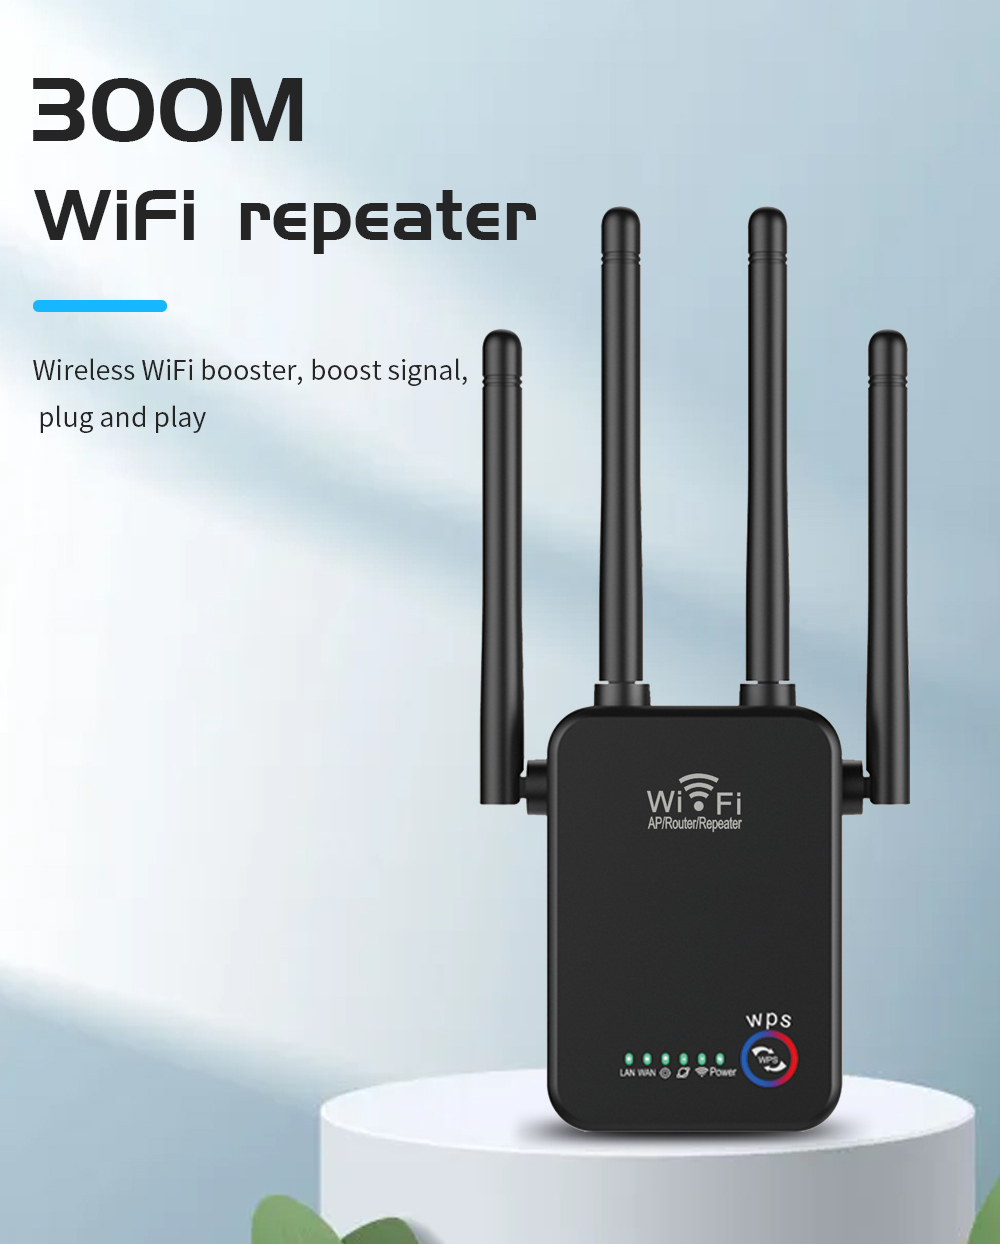 Seaidea-U7-300M-WiFi-Repeater-24G-300Mbps-Wireless-Signal-Booster-Amplifier-USEU-Plug-Support-WPS-Ro-1955593-1